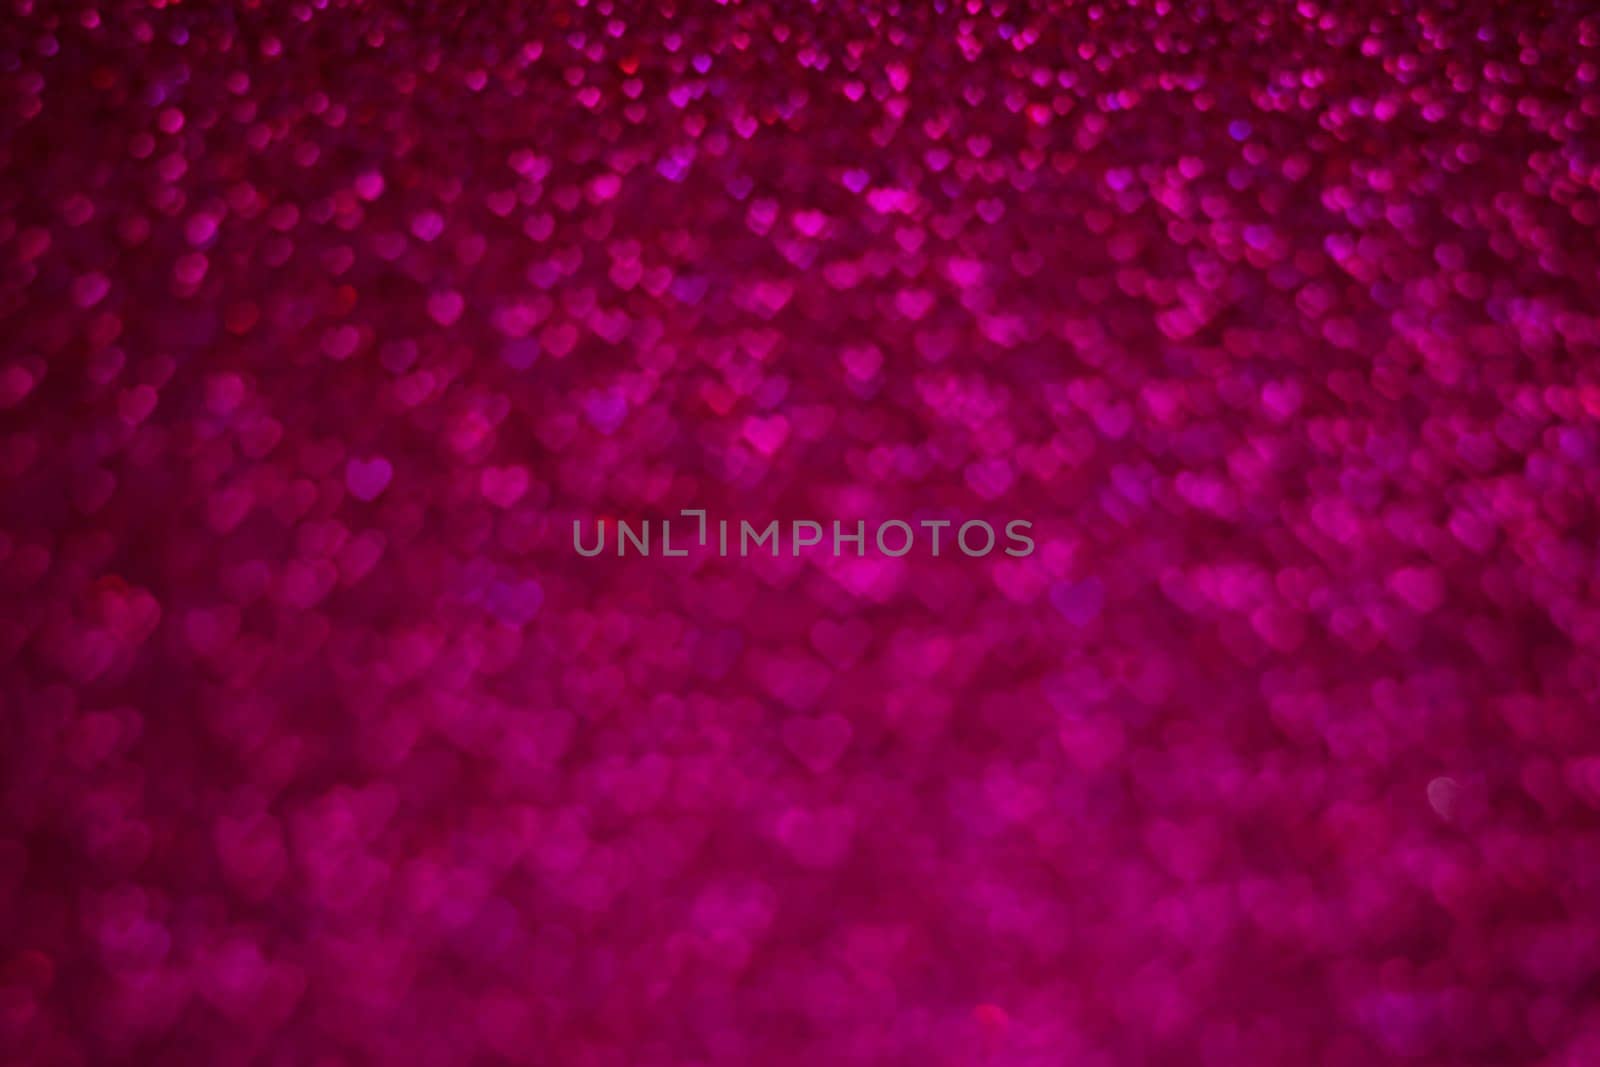 A close up of a pink background with many small hearts scattered throughout. The image has a romantic and dreamy feel to it